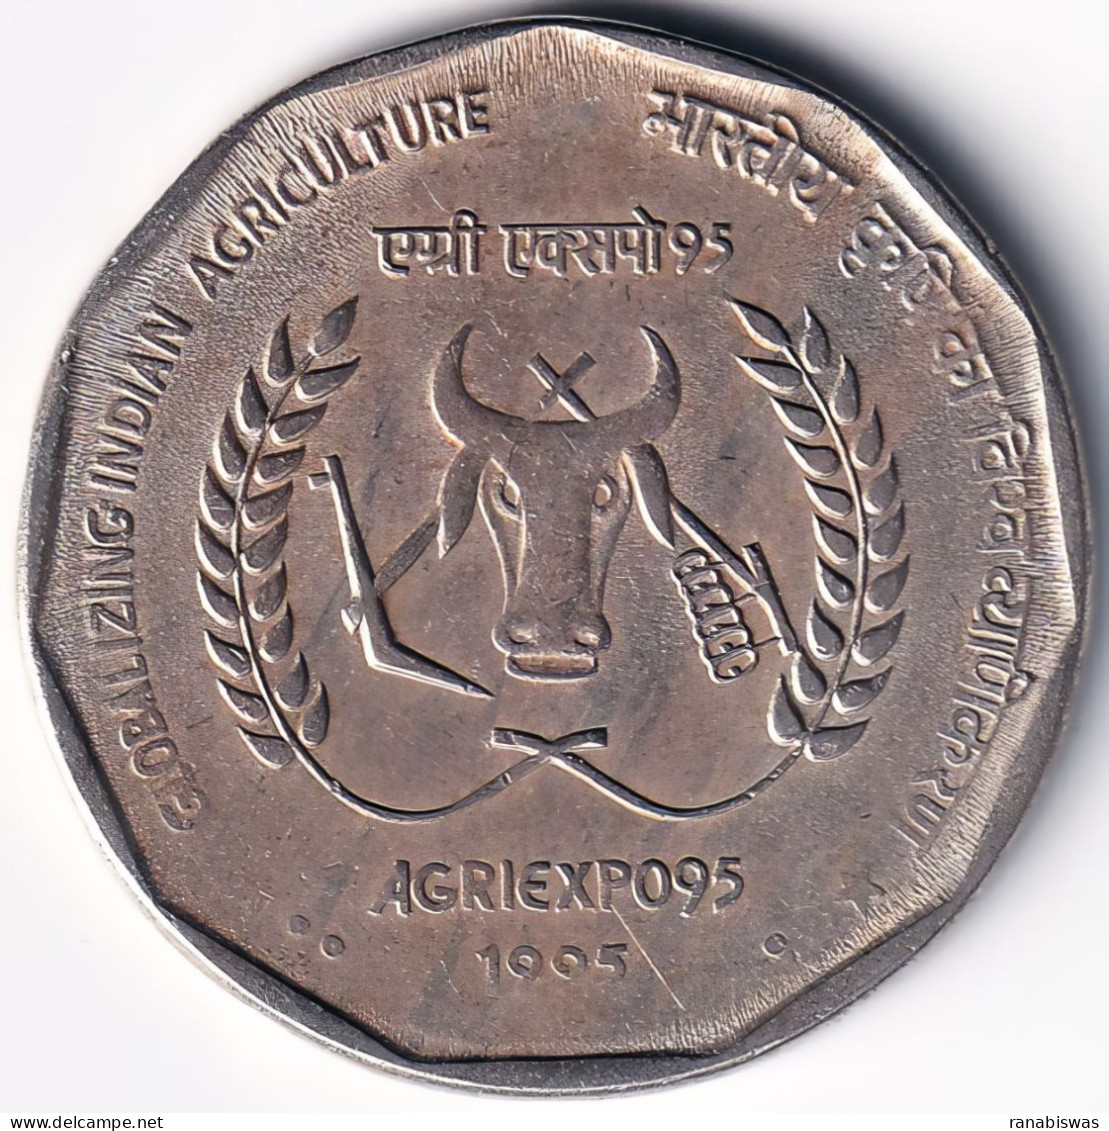 INDIA COIN LOT 125, 2 RUPEES 1995, AGRI EXPO, CALCUTTA MINT, XF, RARE - Indien